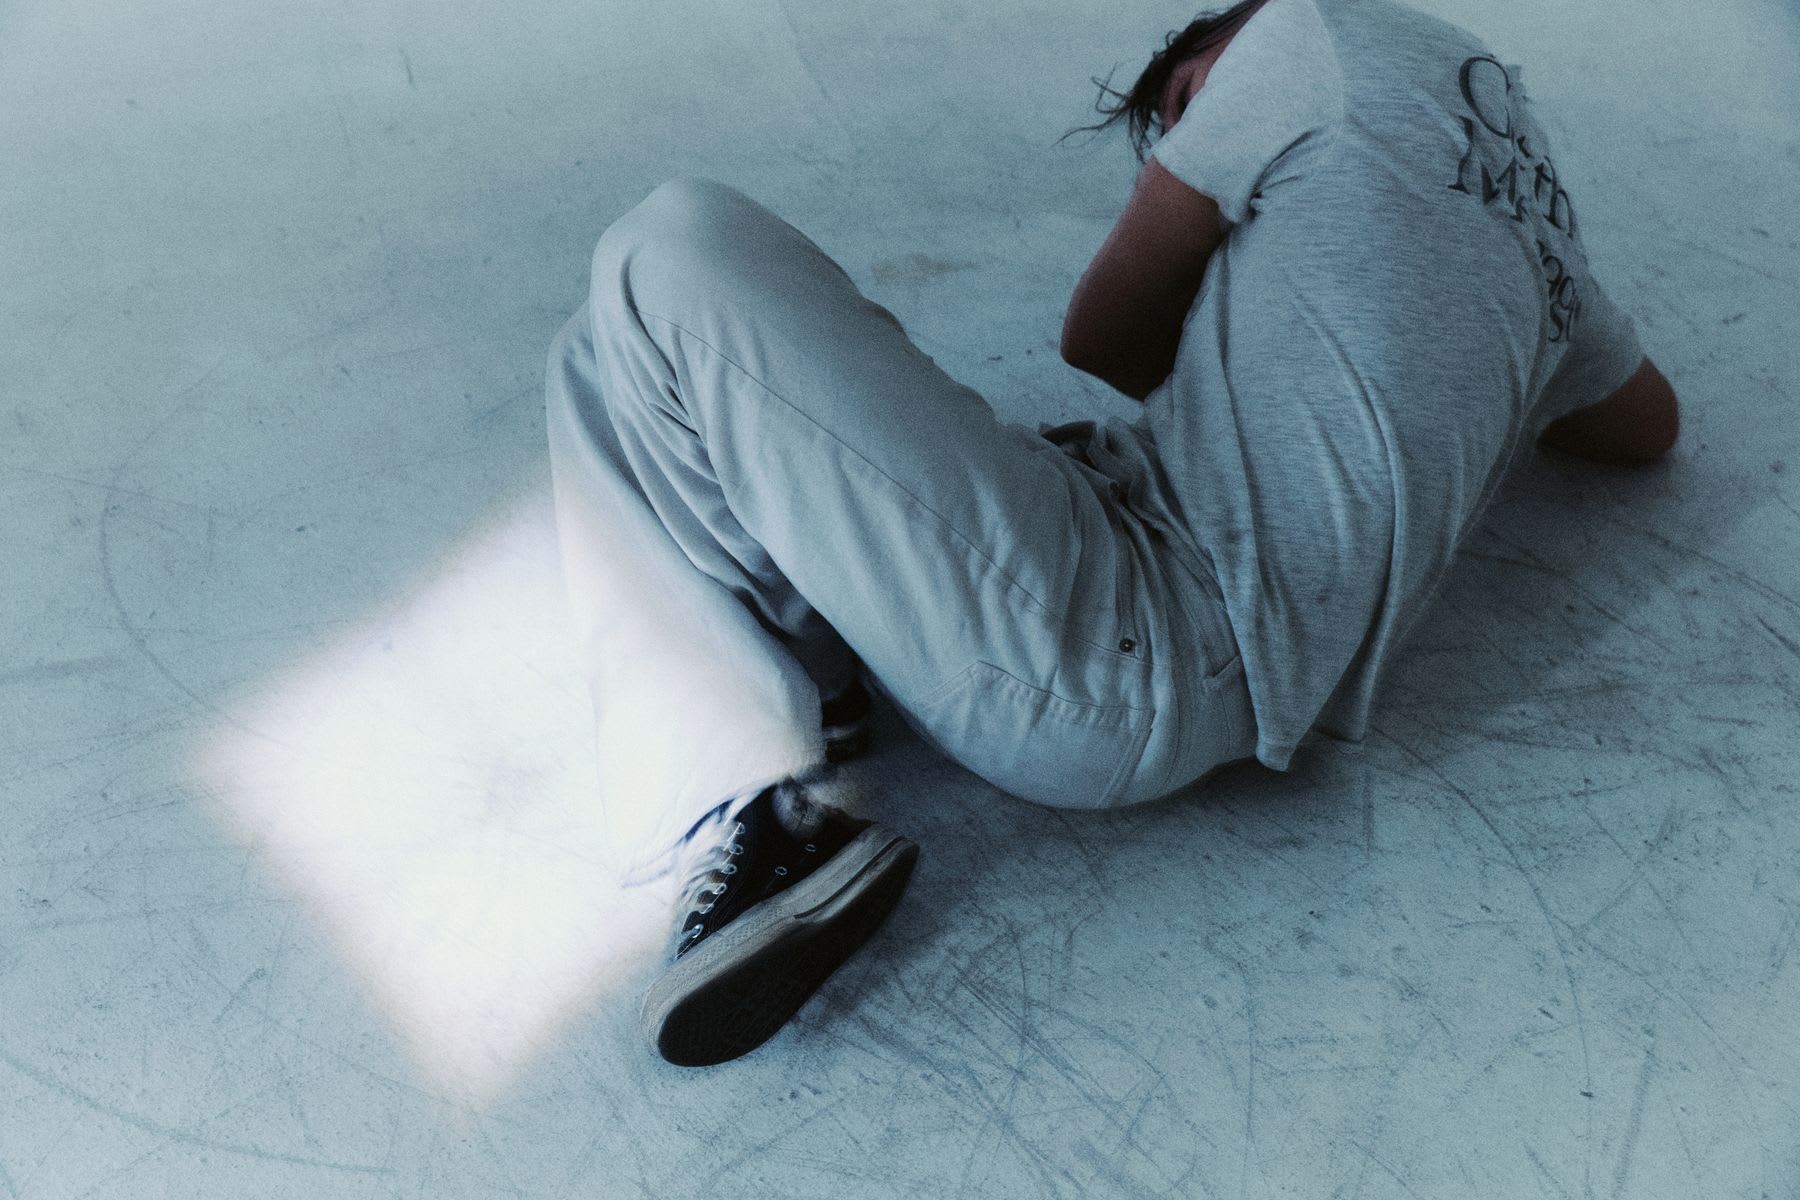 A person lying down on a light-colored surface.